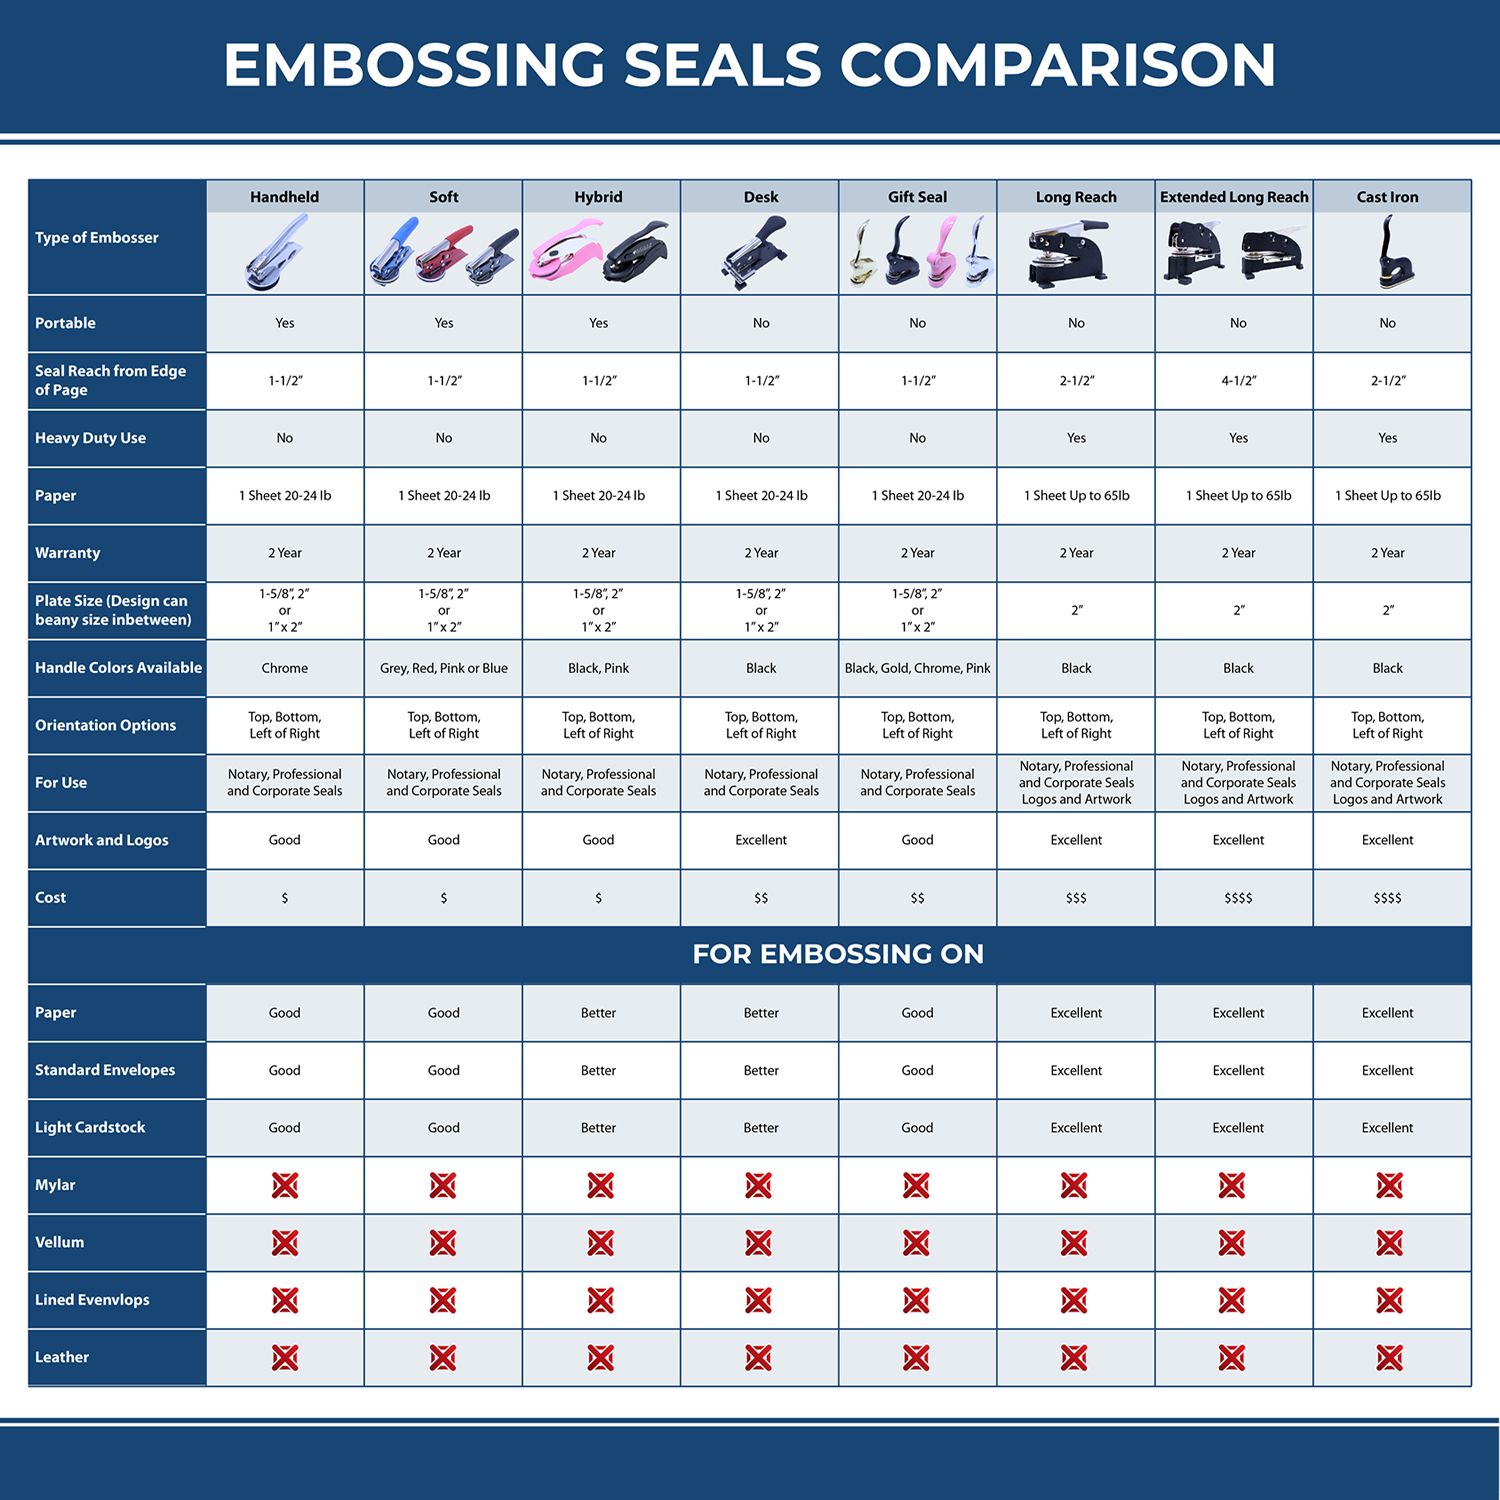 A comparison chart for the different types of mount models available for the State of North Carolina Long Reach Architectural Embossing Seal.